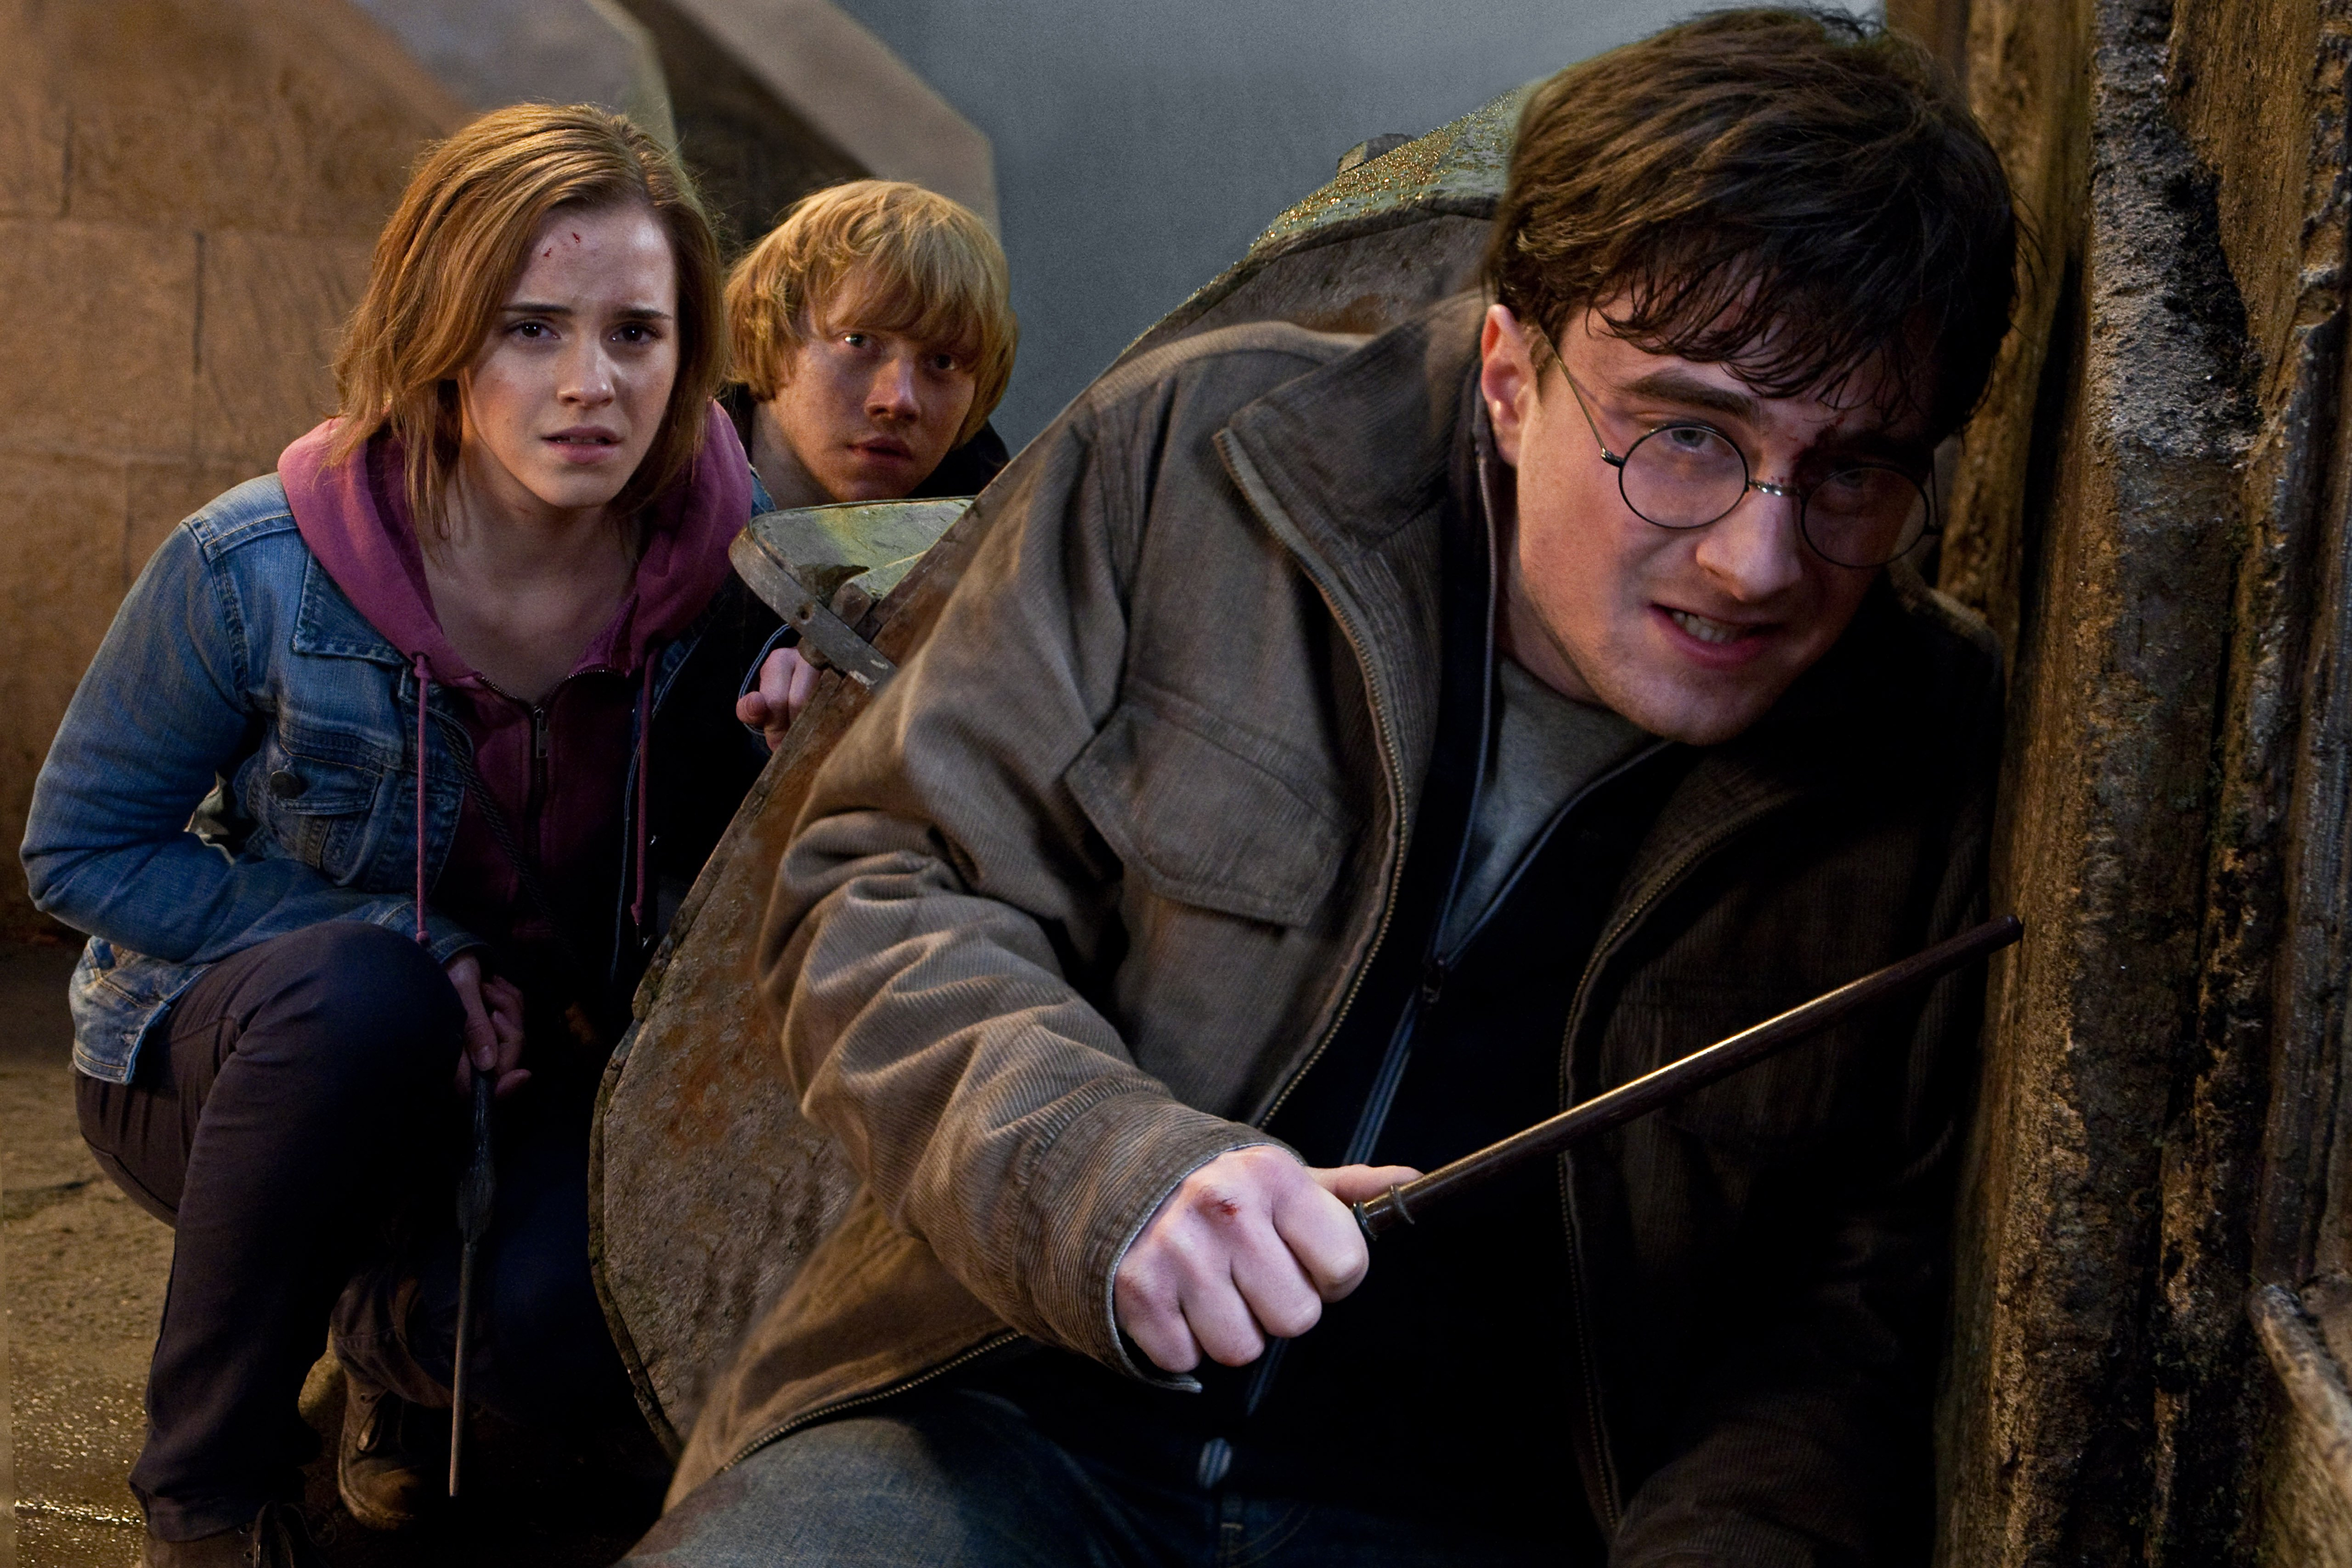 Harry Potter And The Deathly Hallows Part 2 4k Ultra Hd Wallpaper